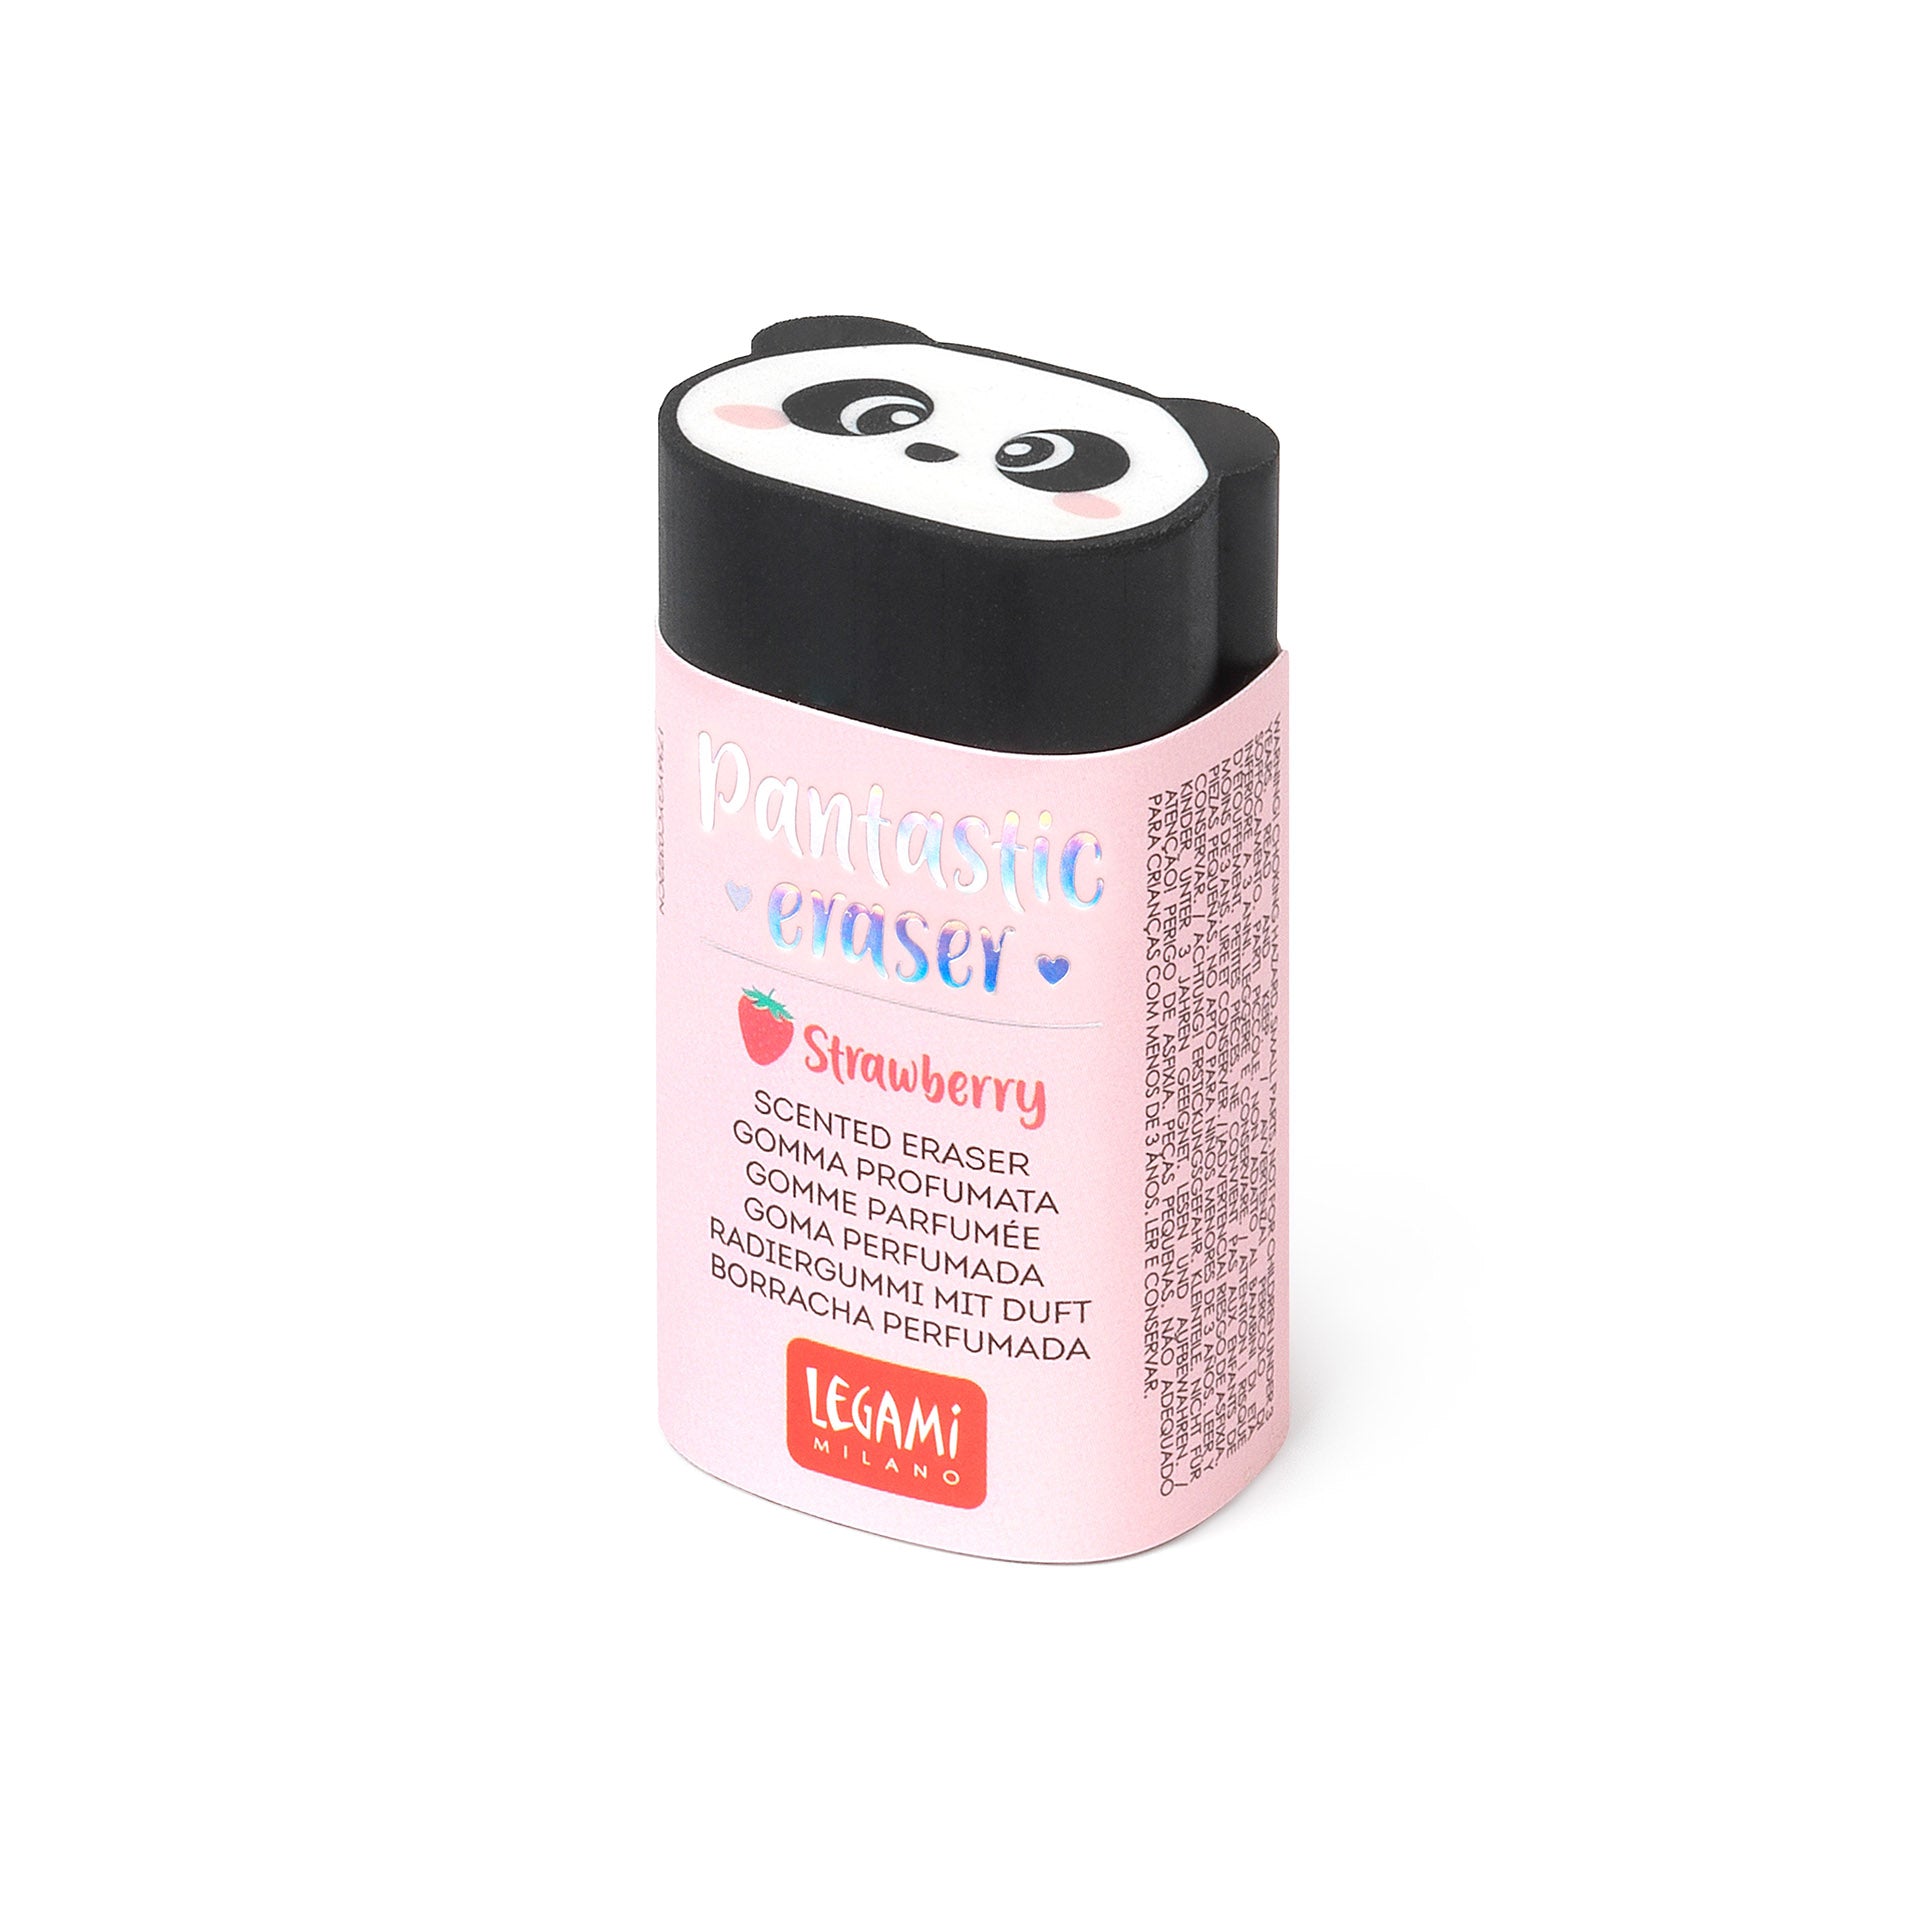 An eraser in the shape of a panda's head. The eraser is partially covered in a pink card retail packaging stating the product name and details including that it is scented with strawberry.